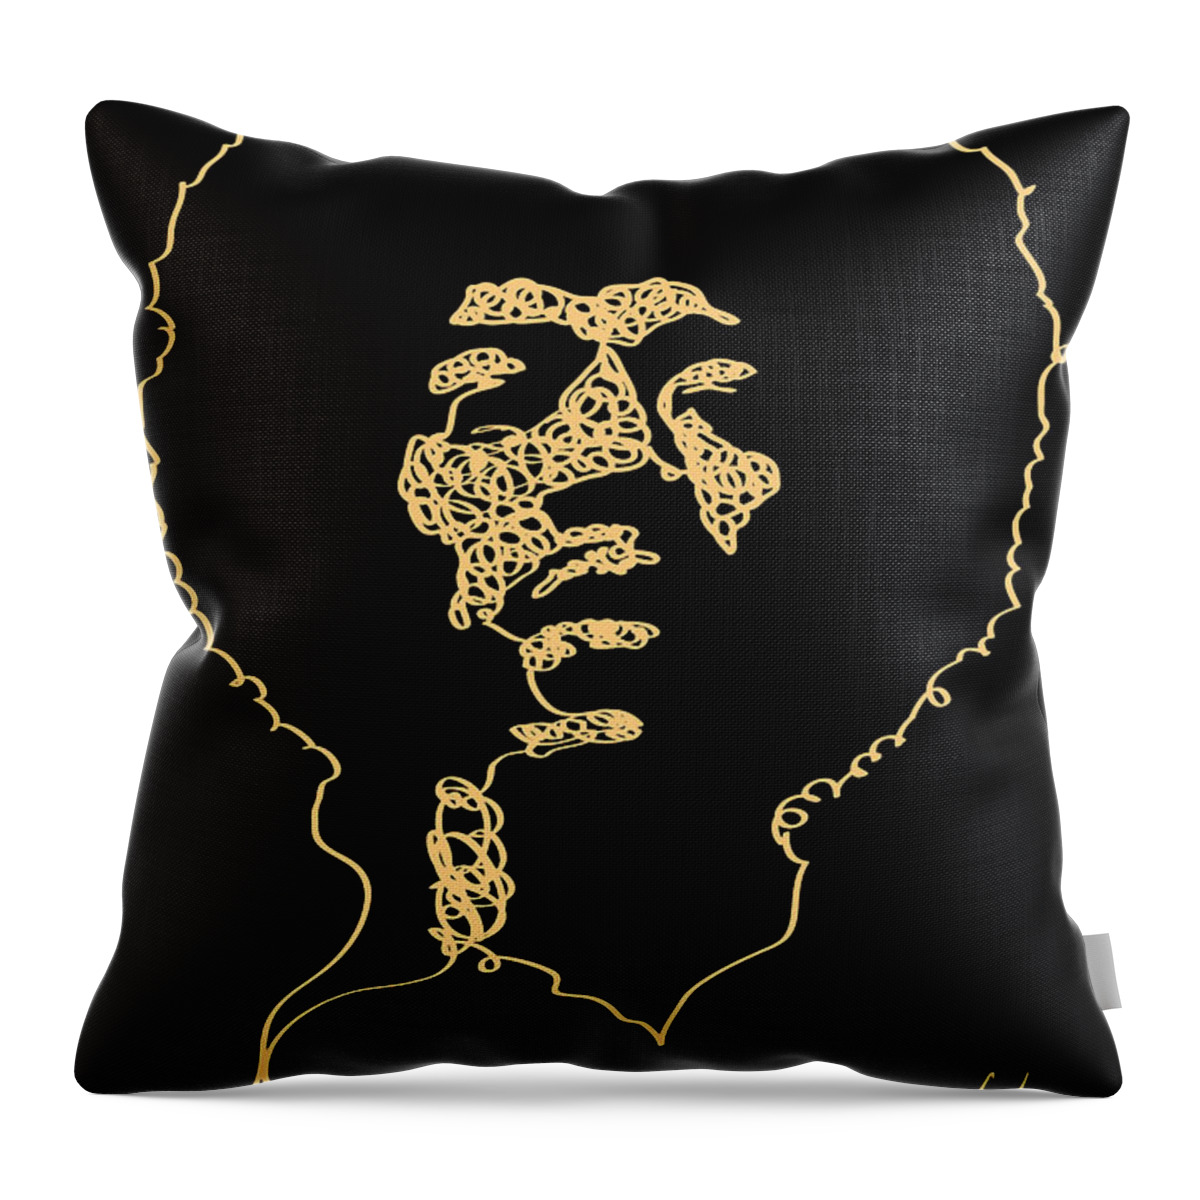 Jimi Hendrix Throw Pillow featuring the drawing Jimi - one line drawing portrait by Vart. by Vart